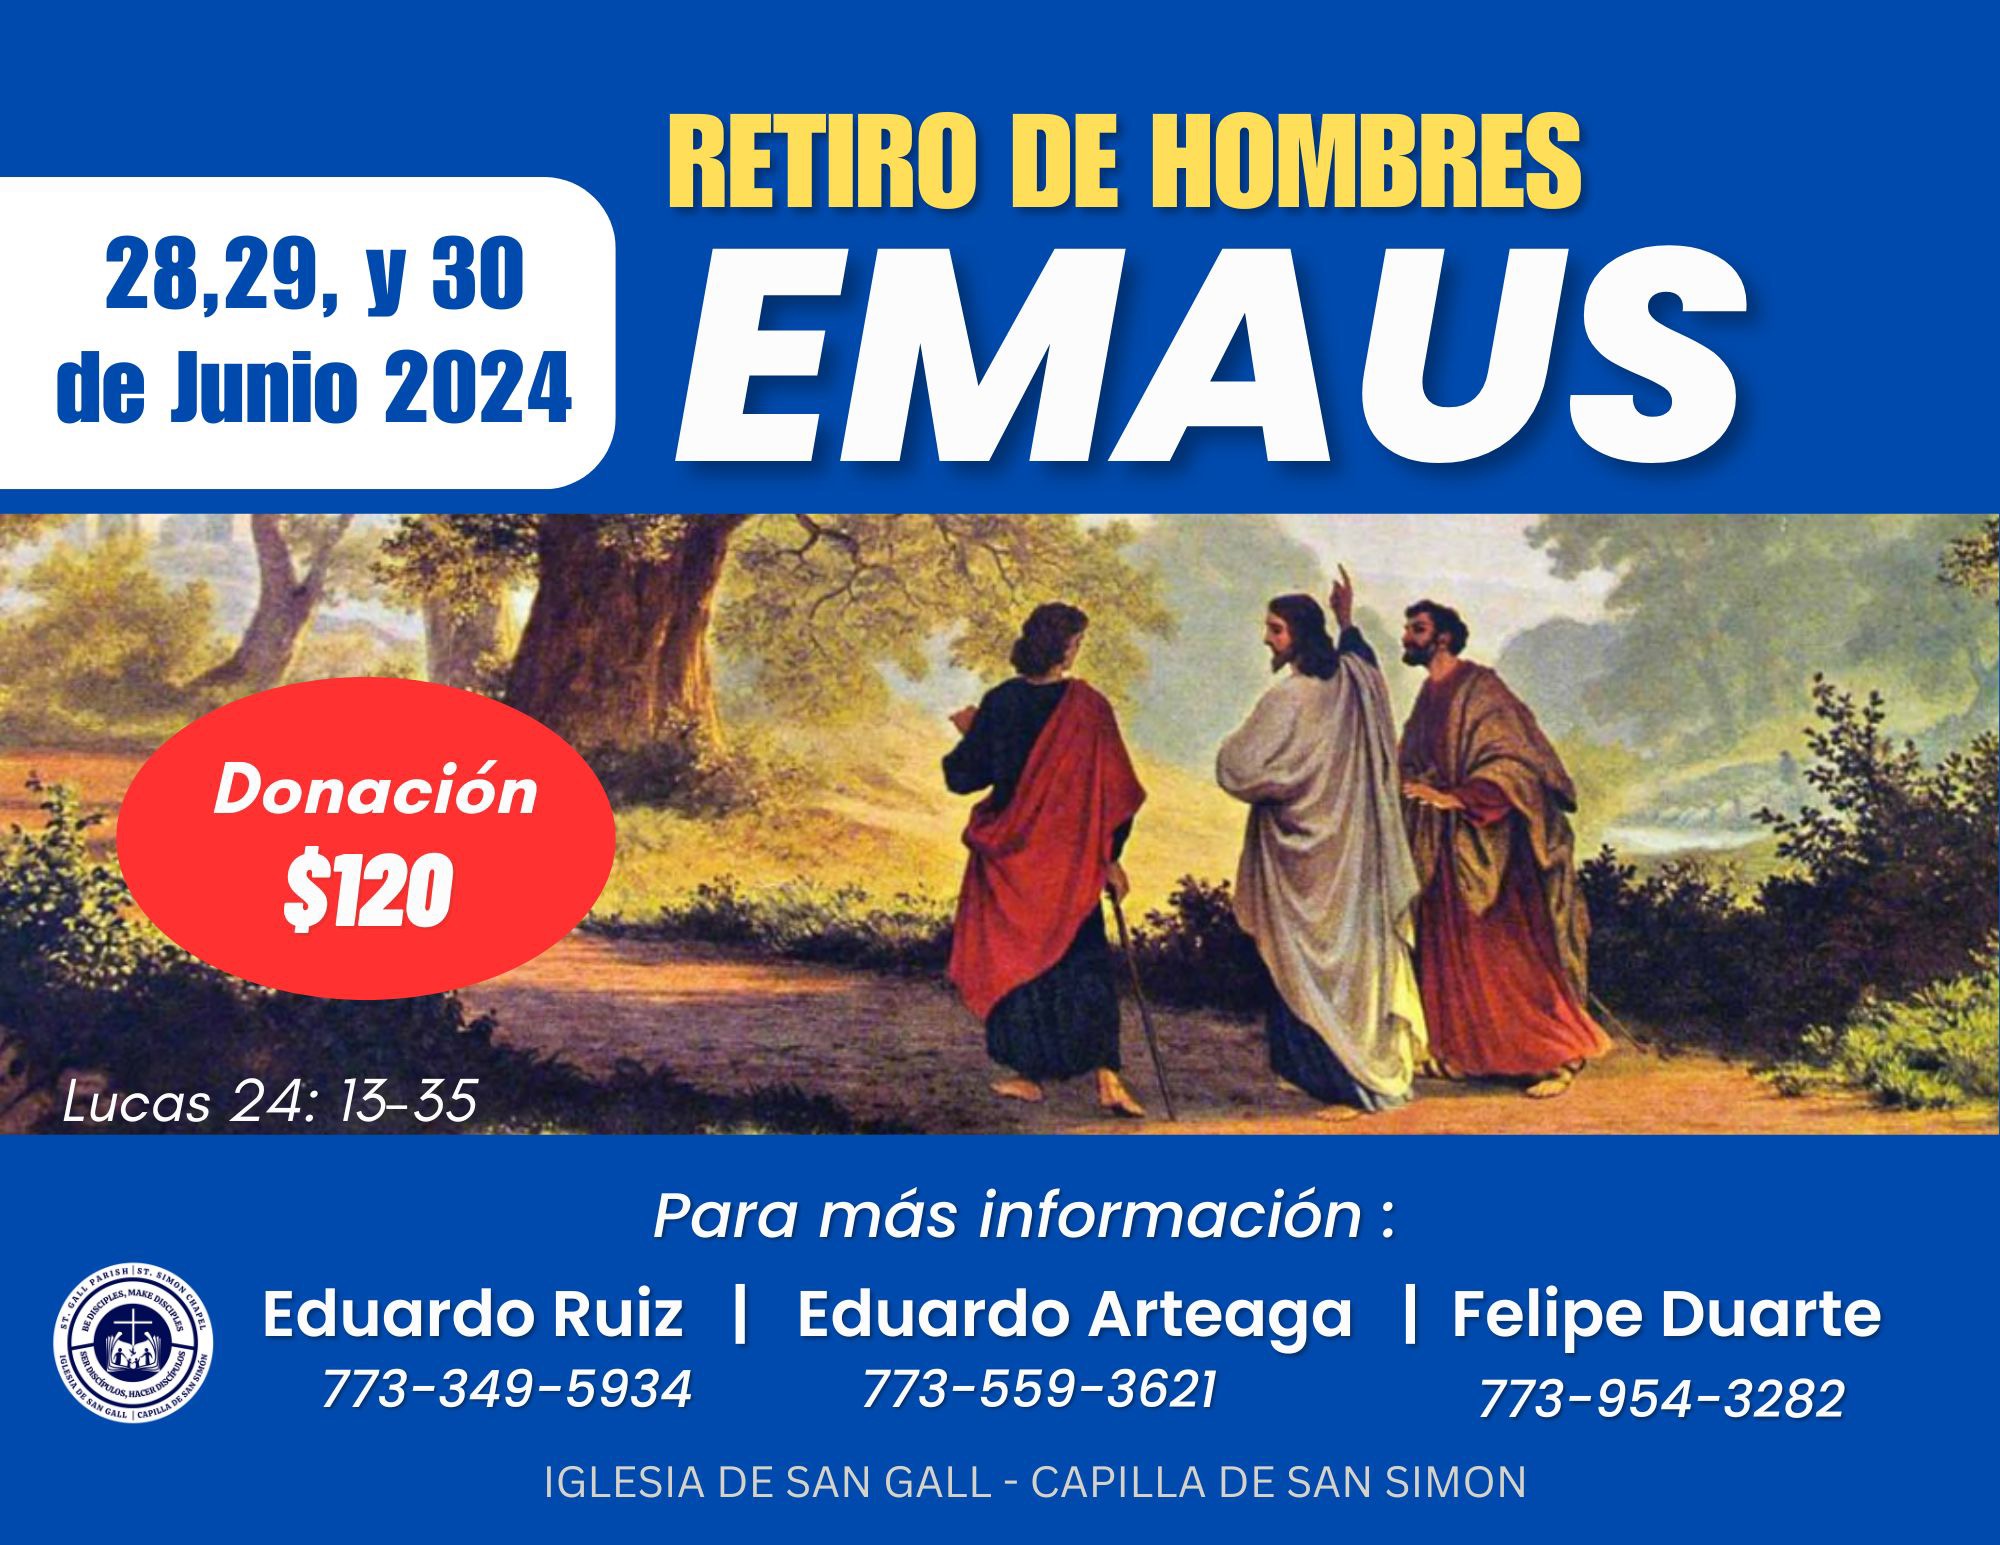 EMAUS Hombres